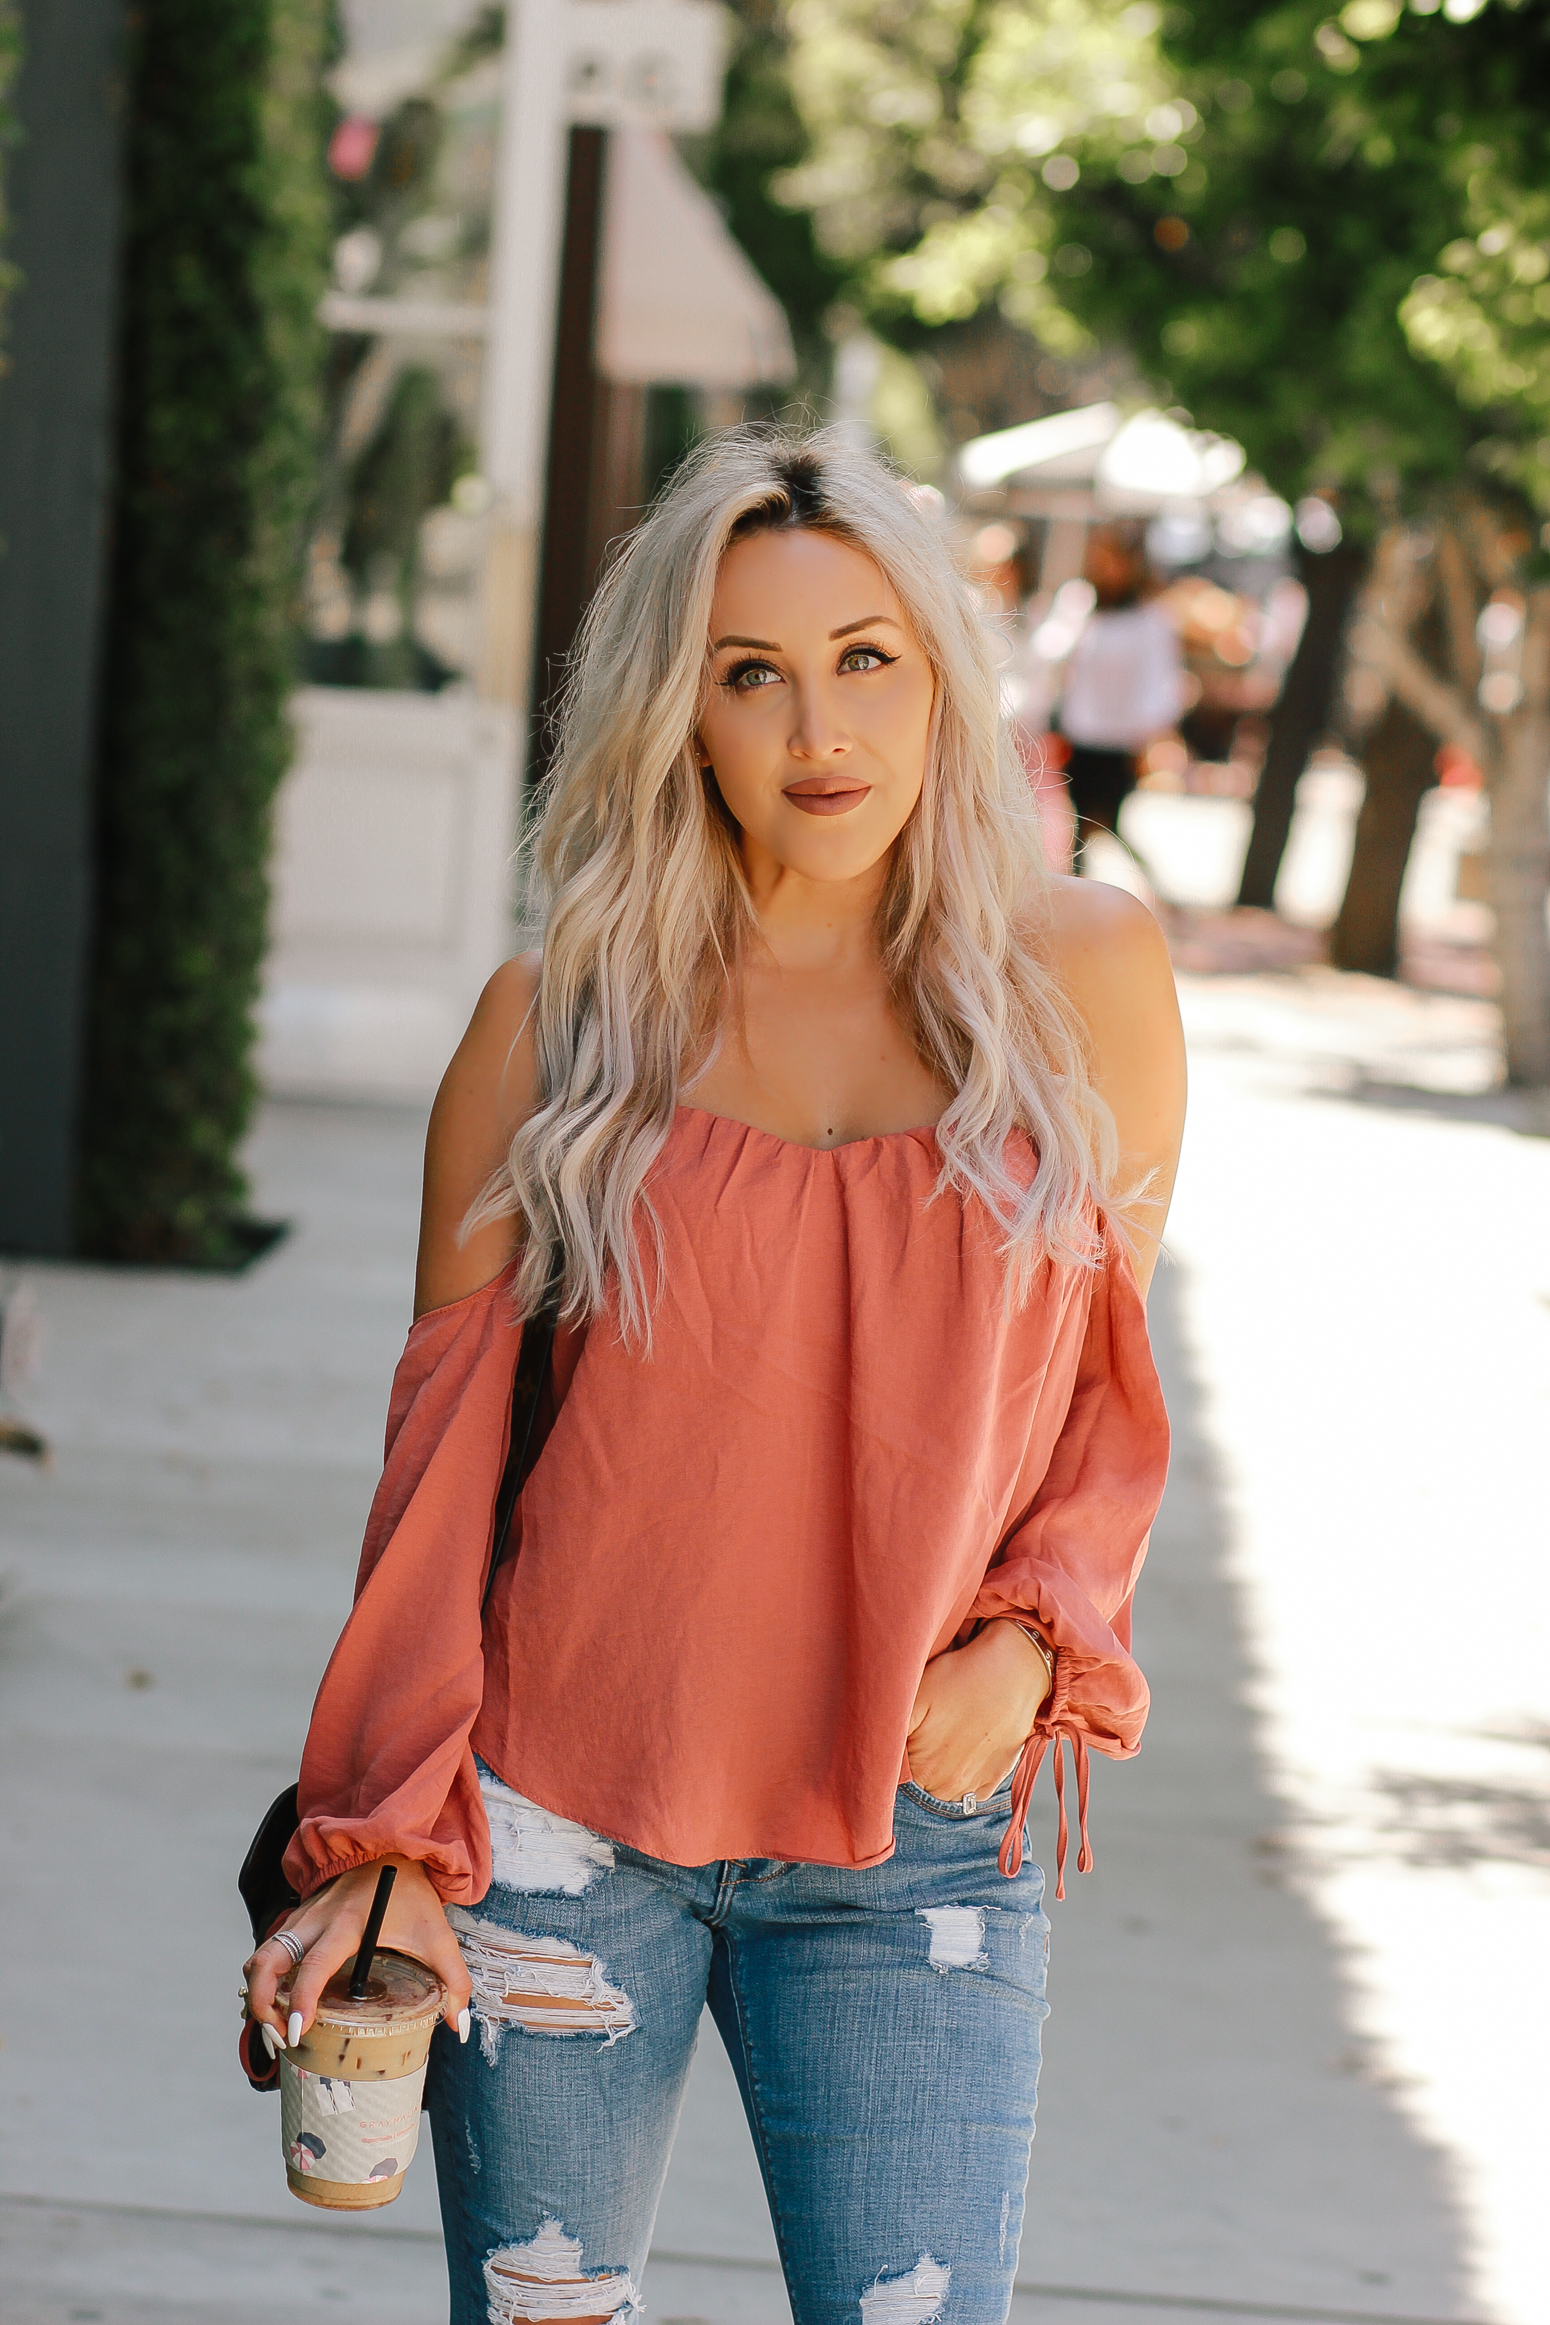 Blondie in the City | Off the Shoulder Top, Distressed Jeans, Sam Edelman Shoes | Summer Fashion